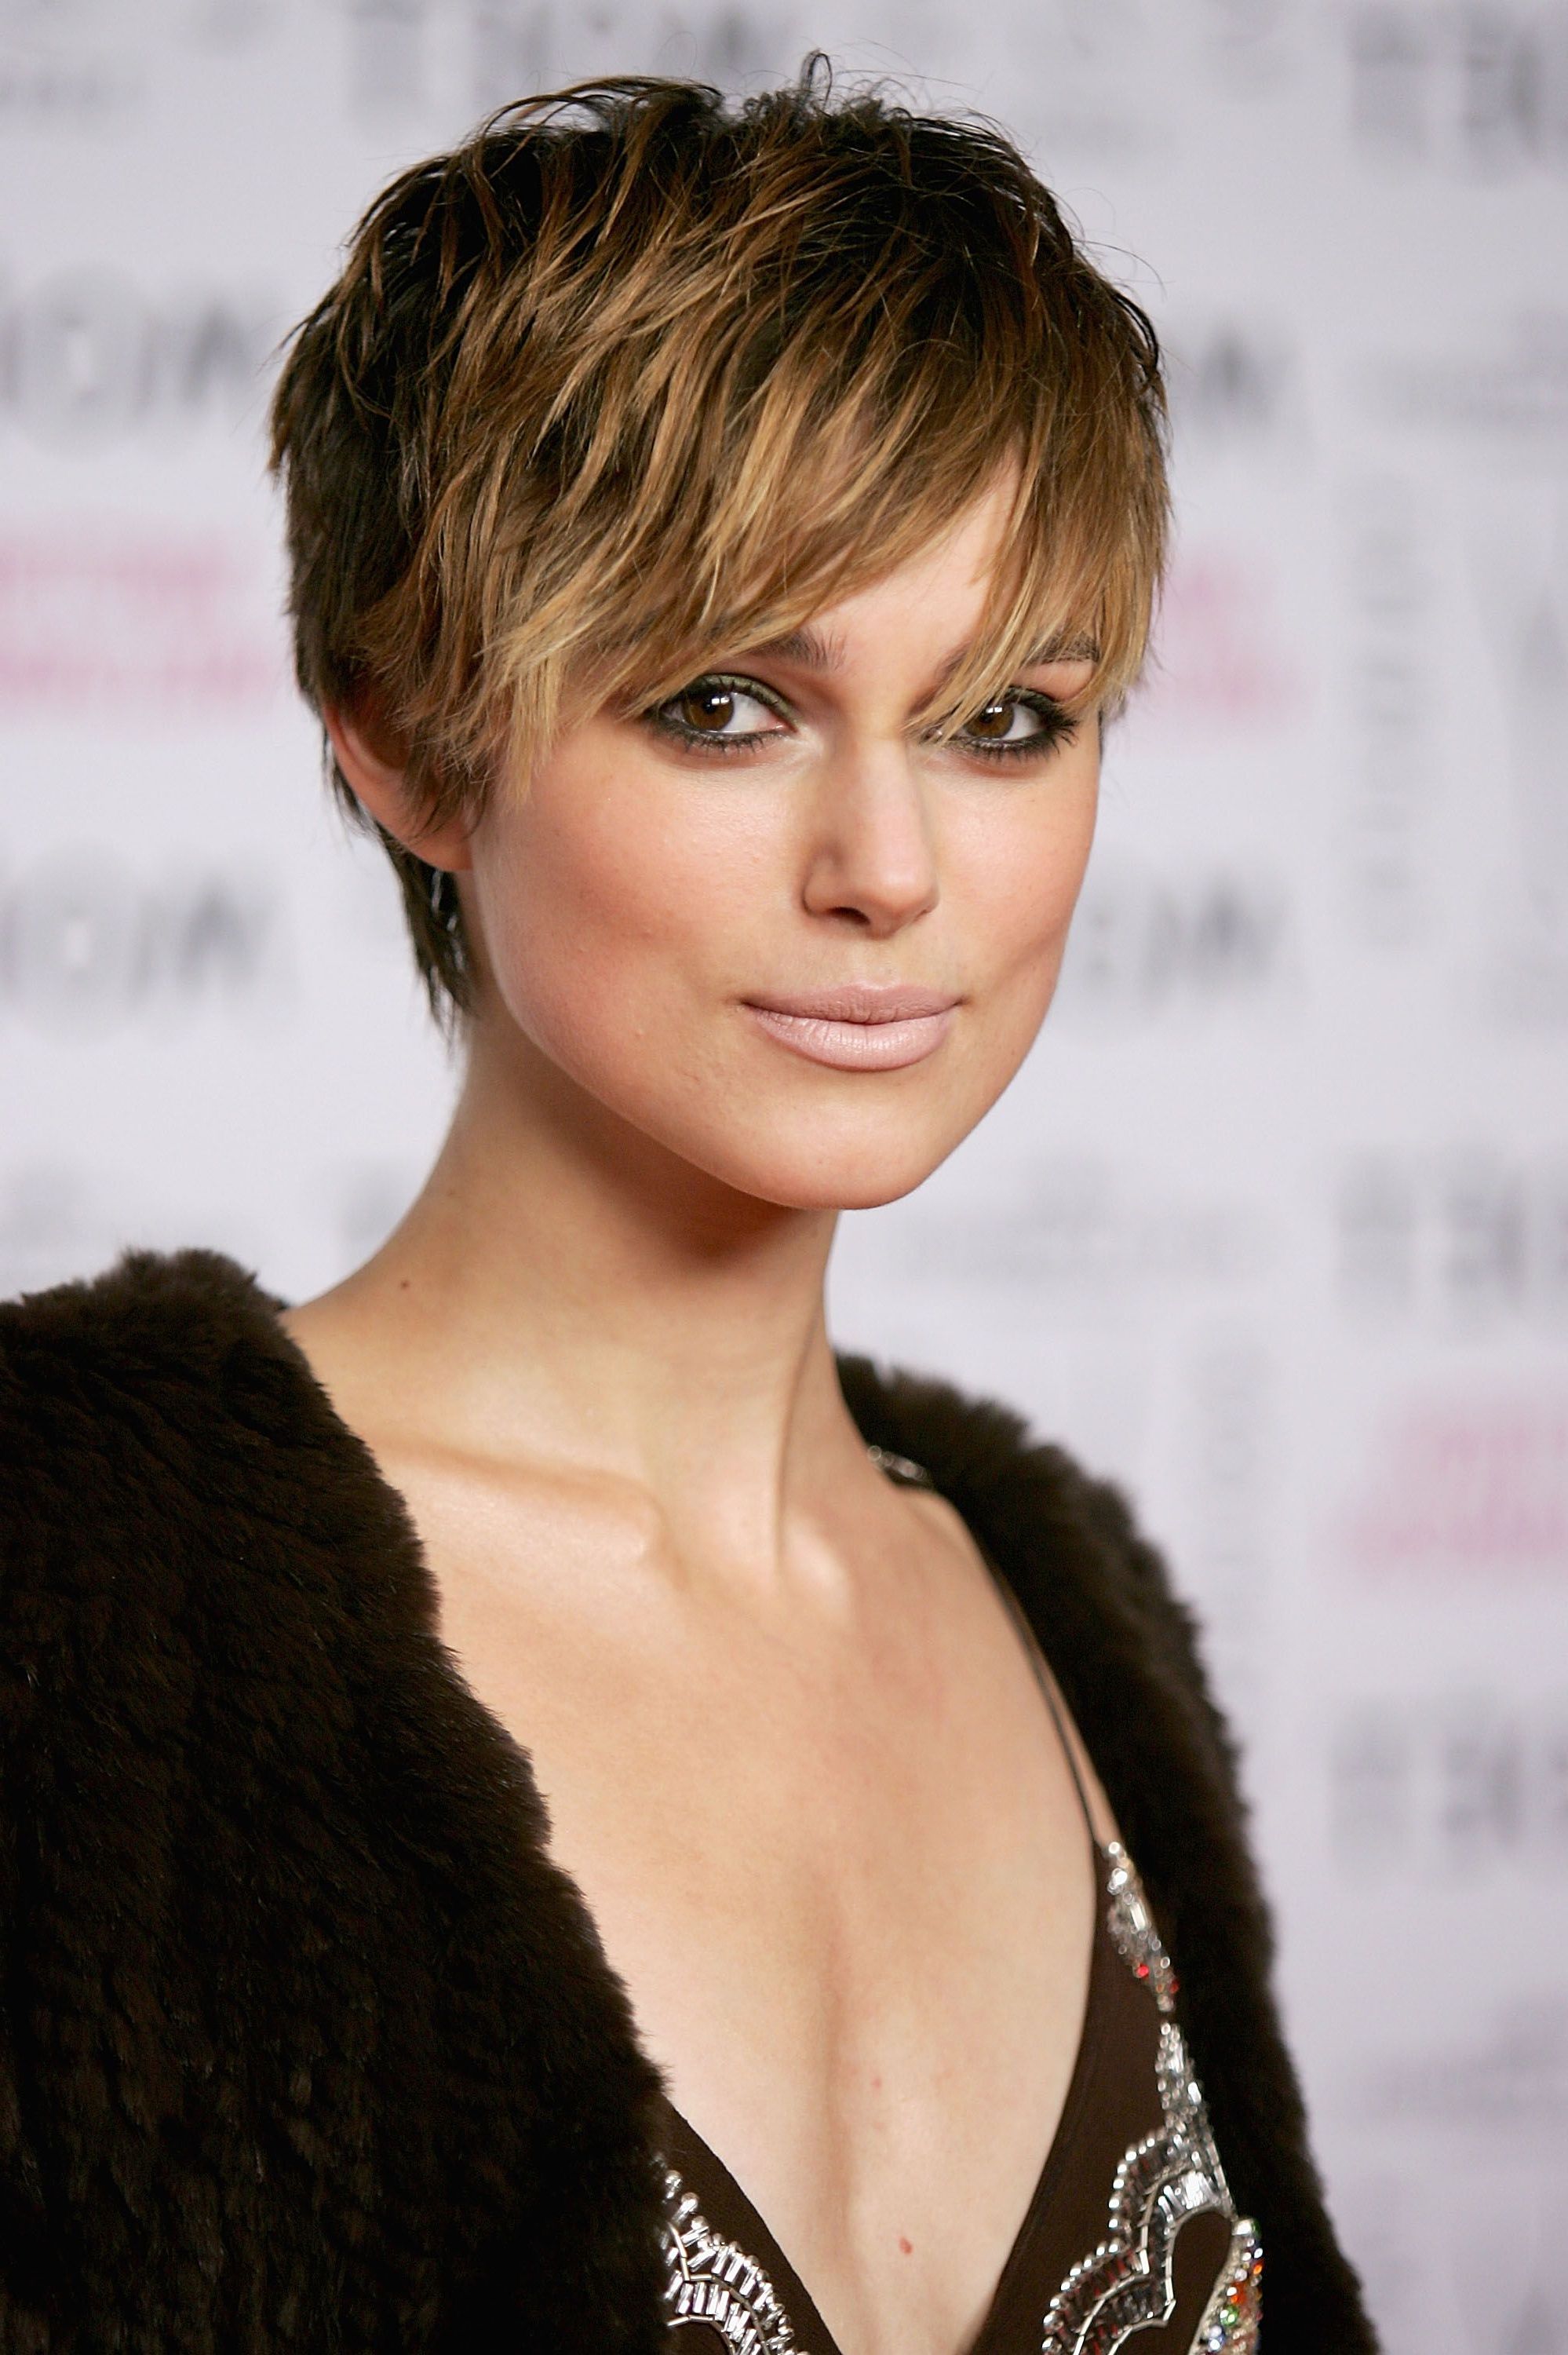 53 Best Pixie Cut Hairstyle Ideas 2018 – Cute Celebrity Pixie Haircuts Inside Pixie Bob Hairstyles With Soft Blonde Highlights (View 16 of 20)